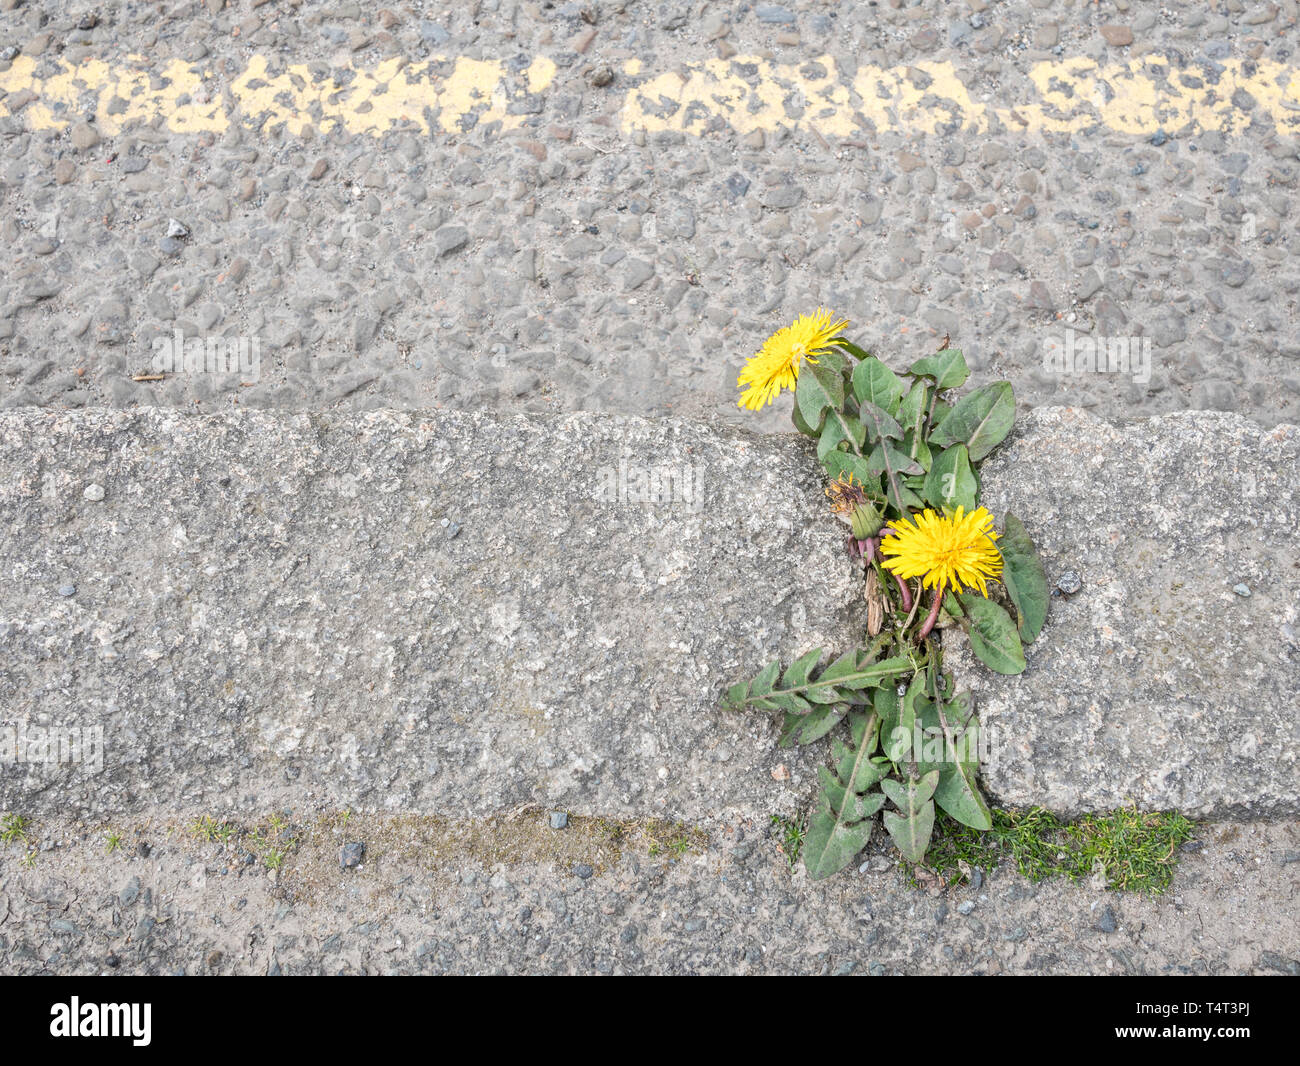 Solitary Dandelion / Taraxacum officinale plant in Springtime sunshine, growing beside a tarmac road with yellow parking restrictions line. Stock Photo